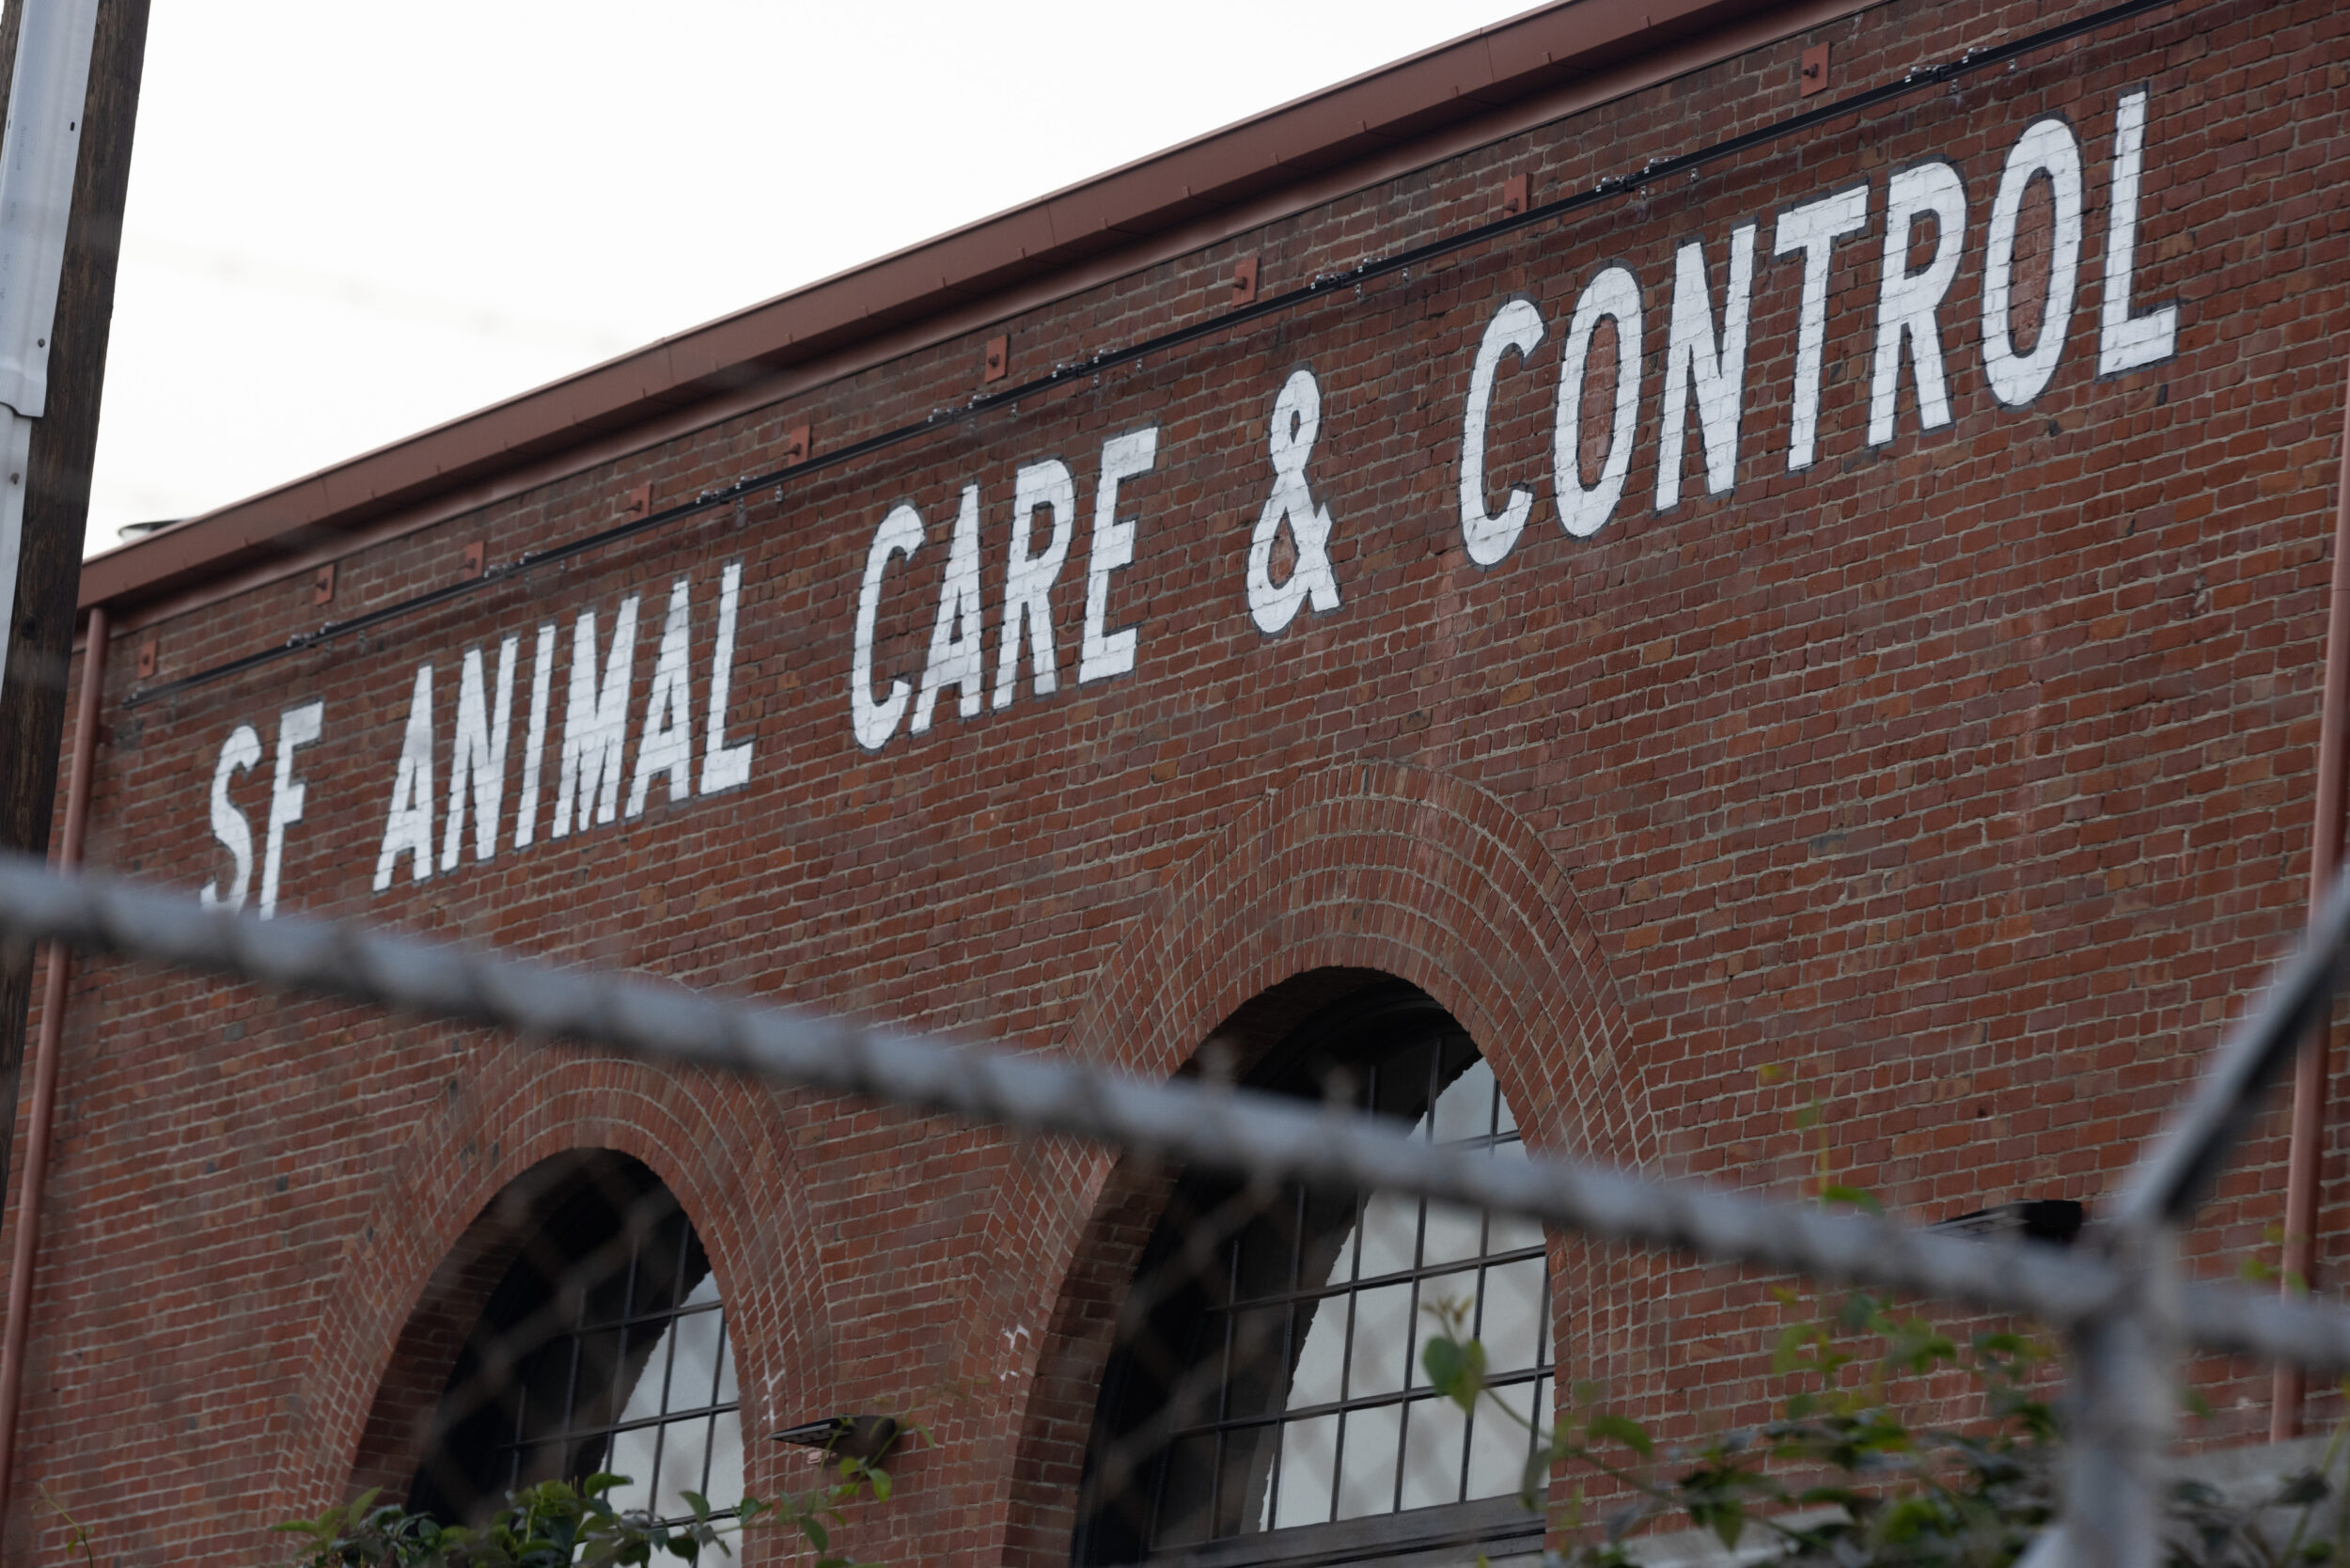 A fence surrounds the perimeter of the parking lot at San Francisco Animal Care and Control (SF ACC) in San Francisco, Calif., on Thursday, Feb. 2, 2023.